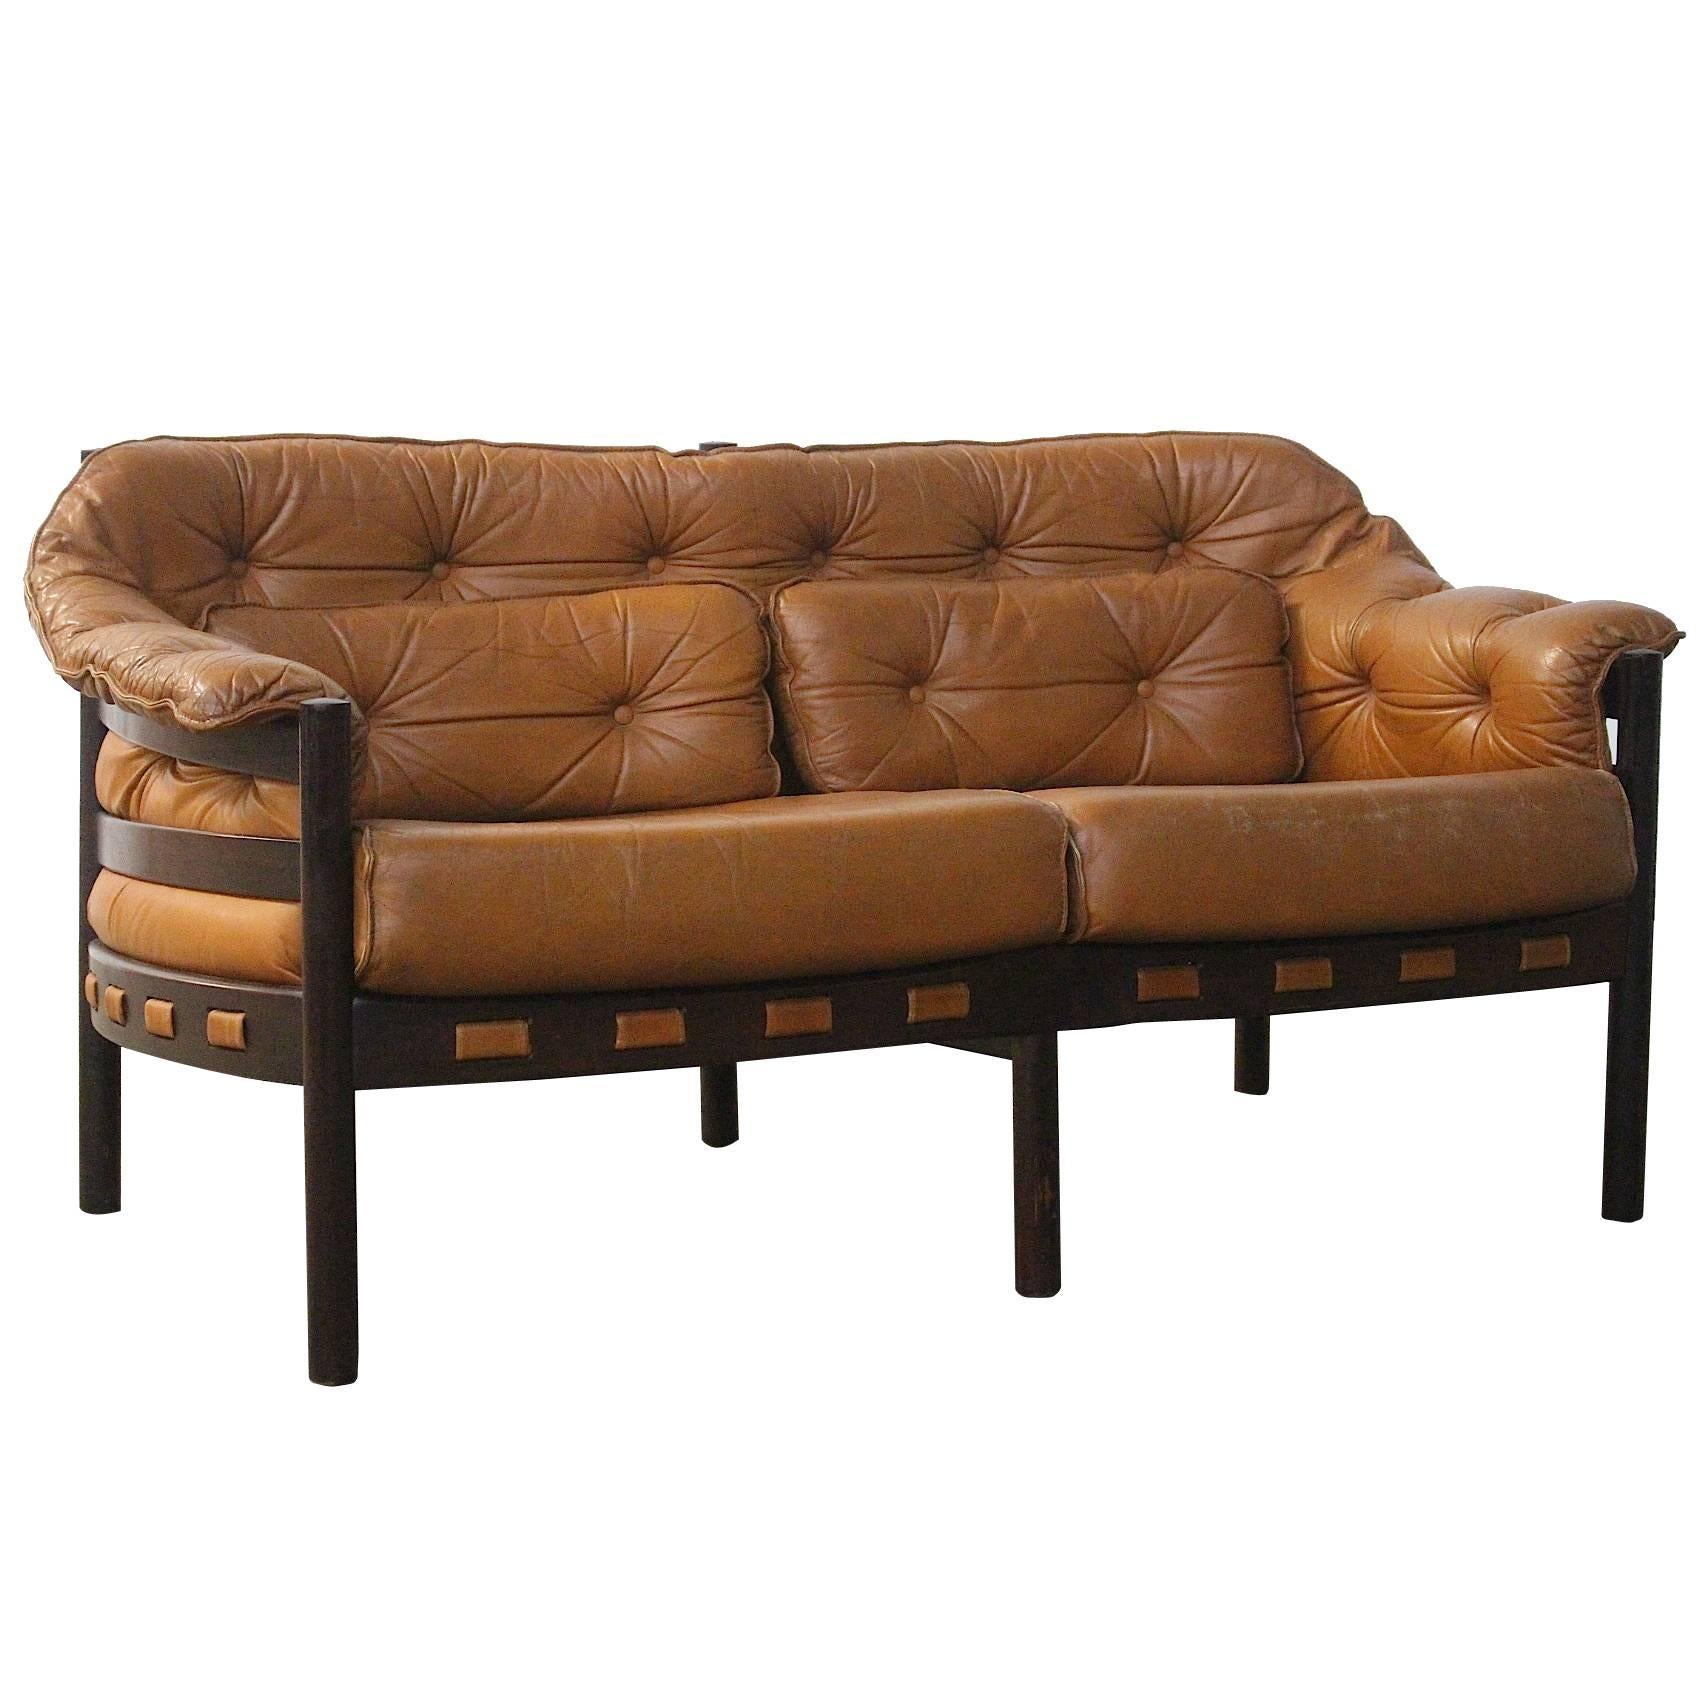 Swedish Sven Ellekaer for Coja Two-Seat Settee Sofa in soft Camel Leather For Sale